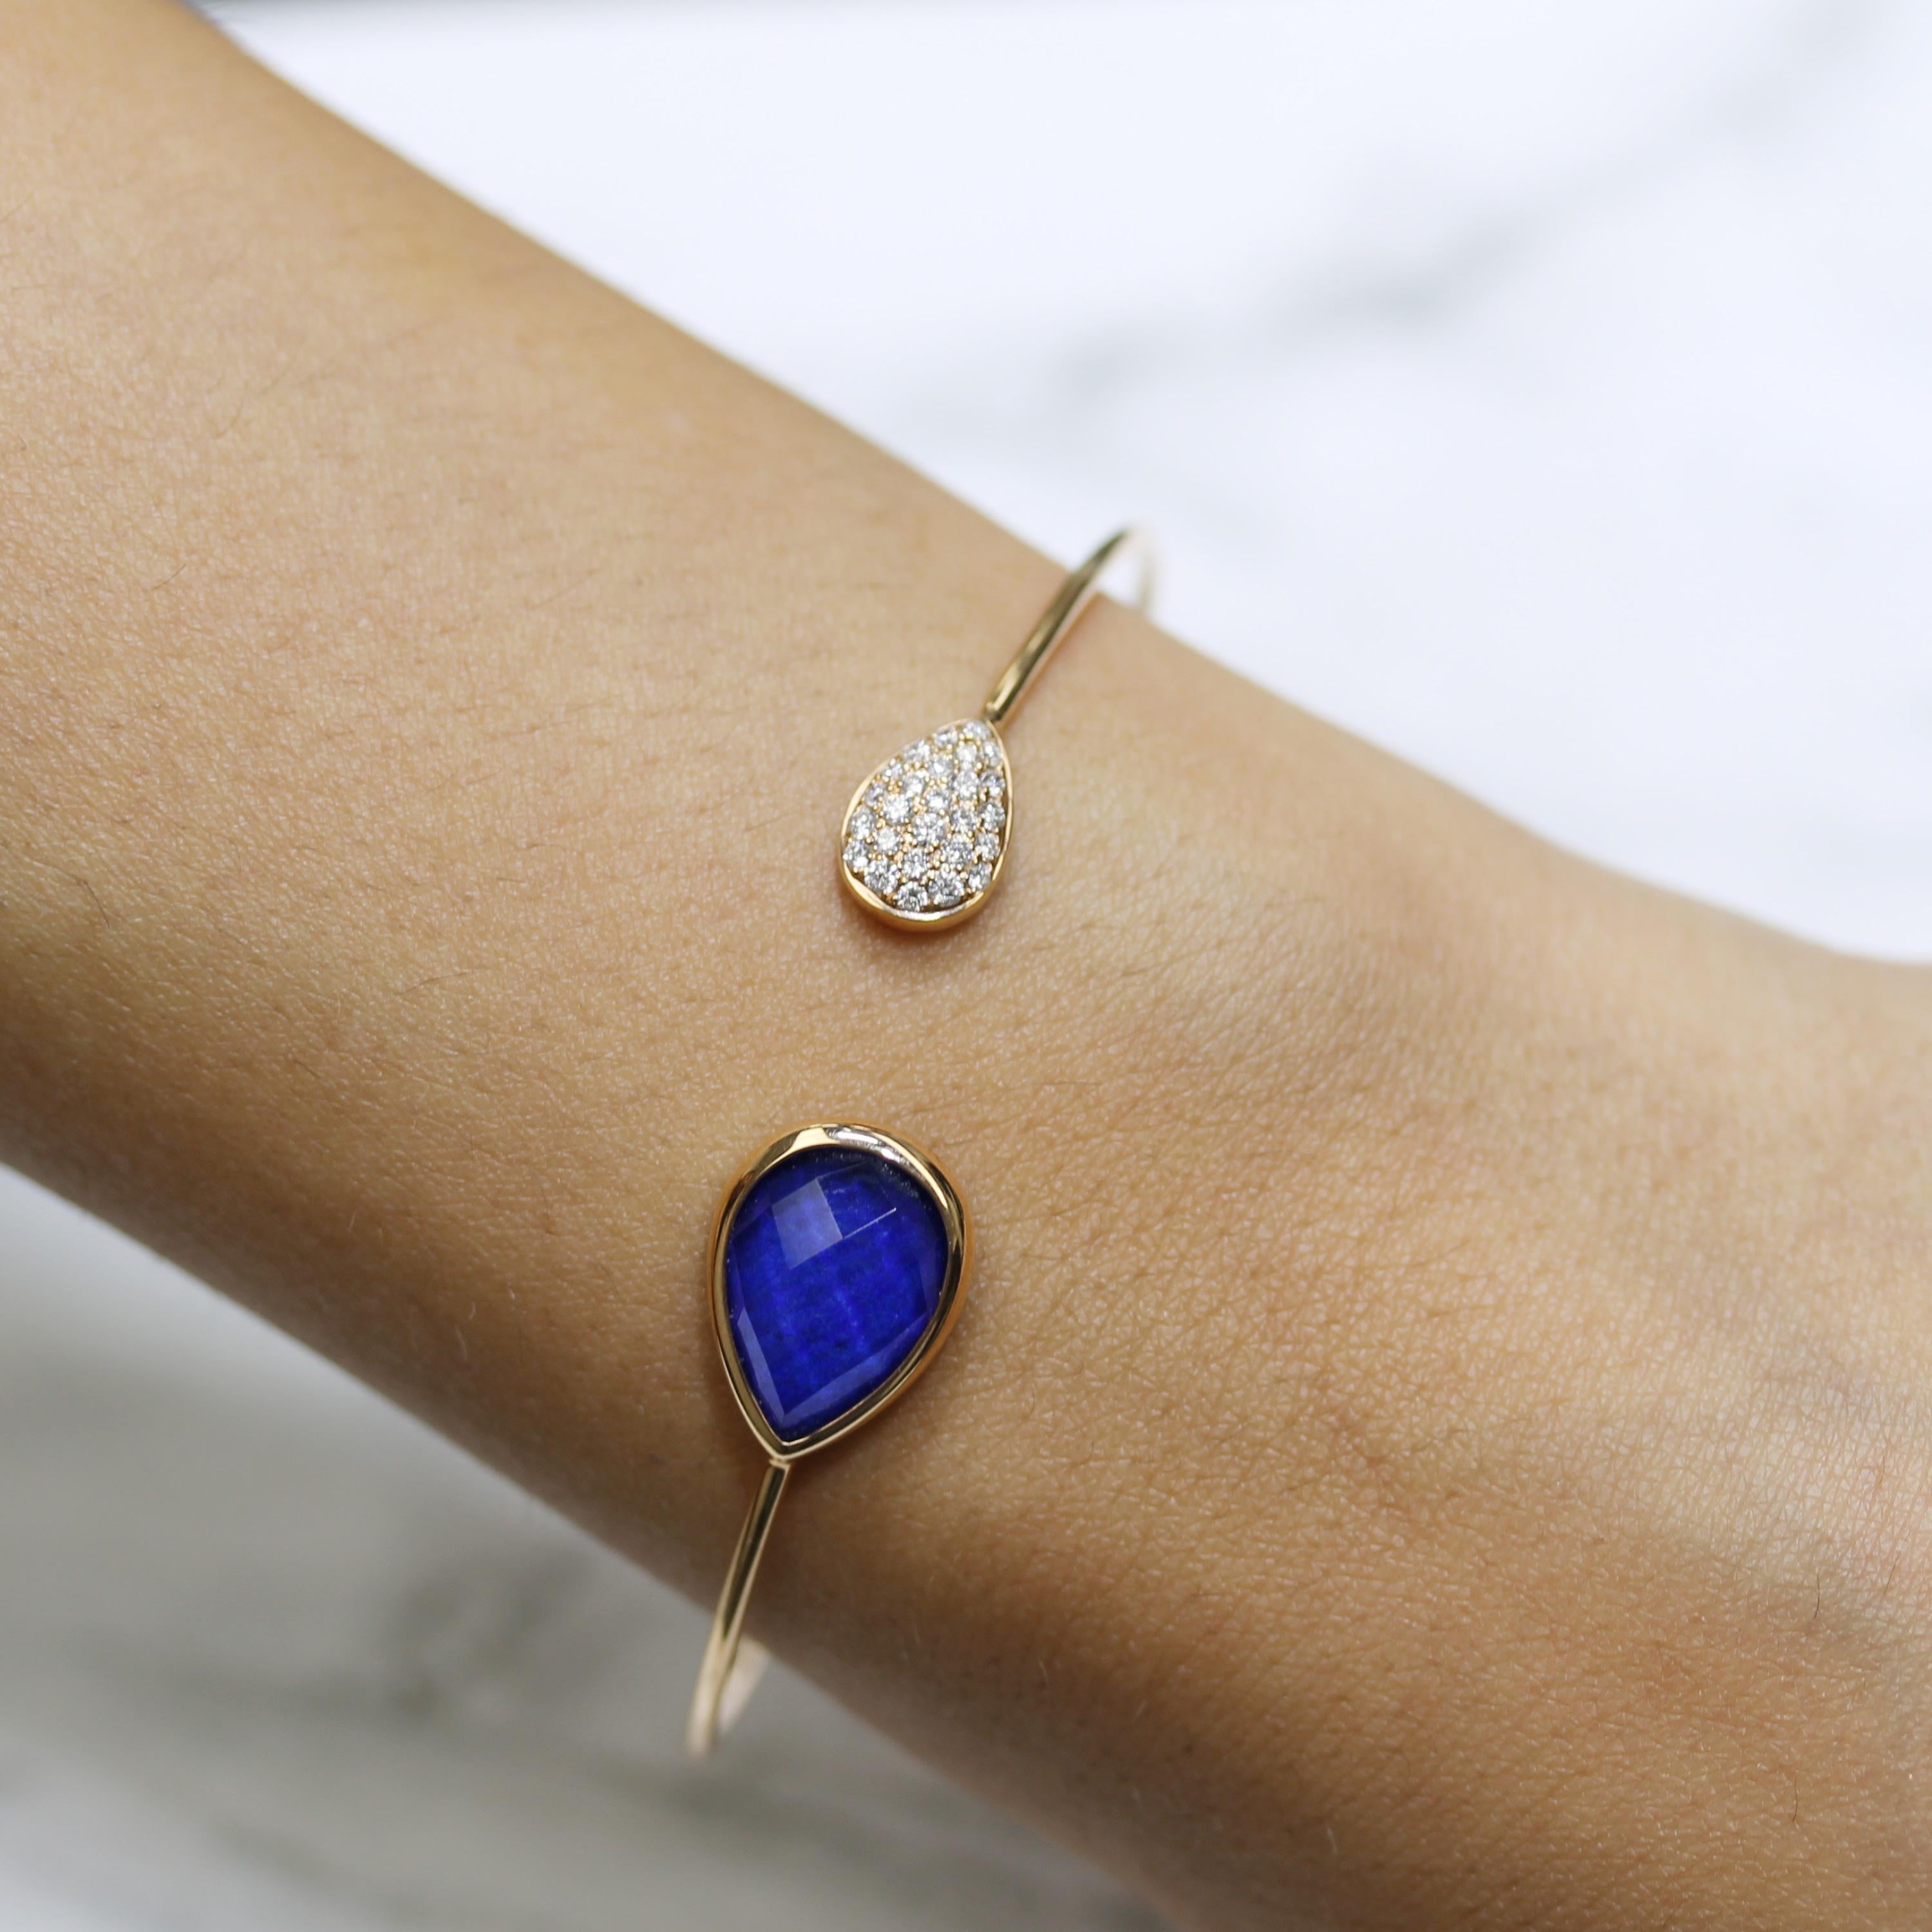 Royal Lapis Flexible Bangle Bracelet, in 18K rose gold, with a pear-shaped, checker-cut, White Quartz layered with Natural Lapis Lazuli, accented by a pear of pavé diamonds. Gold contains a spring mechanism allowing it to comfortable 